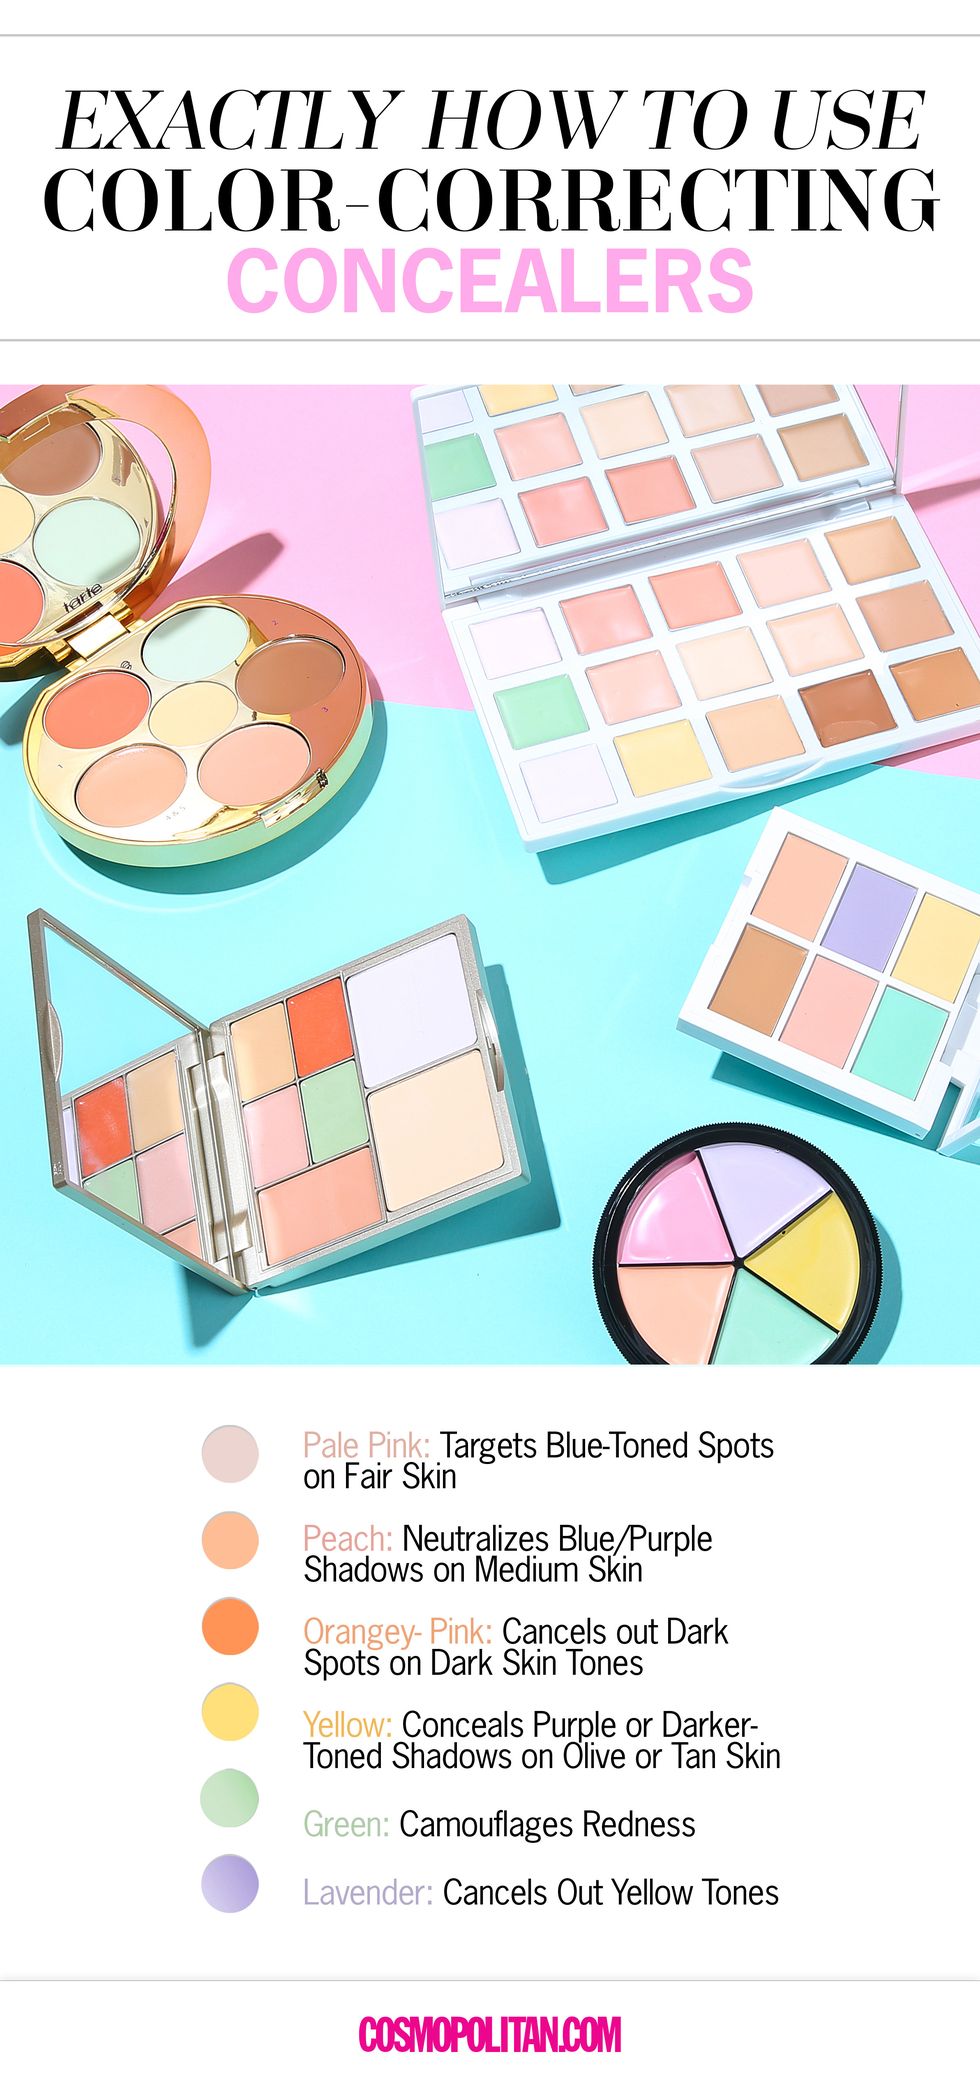 Colorfulness, Pink, Peach, Rectangle, Square, Circle, Illustration, Paint, Cosmetics, Diagram, 